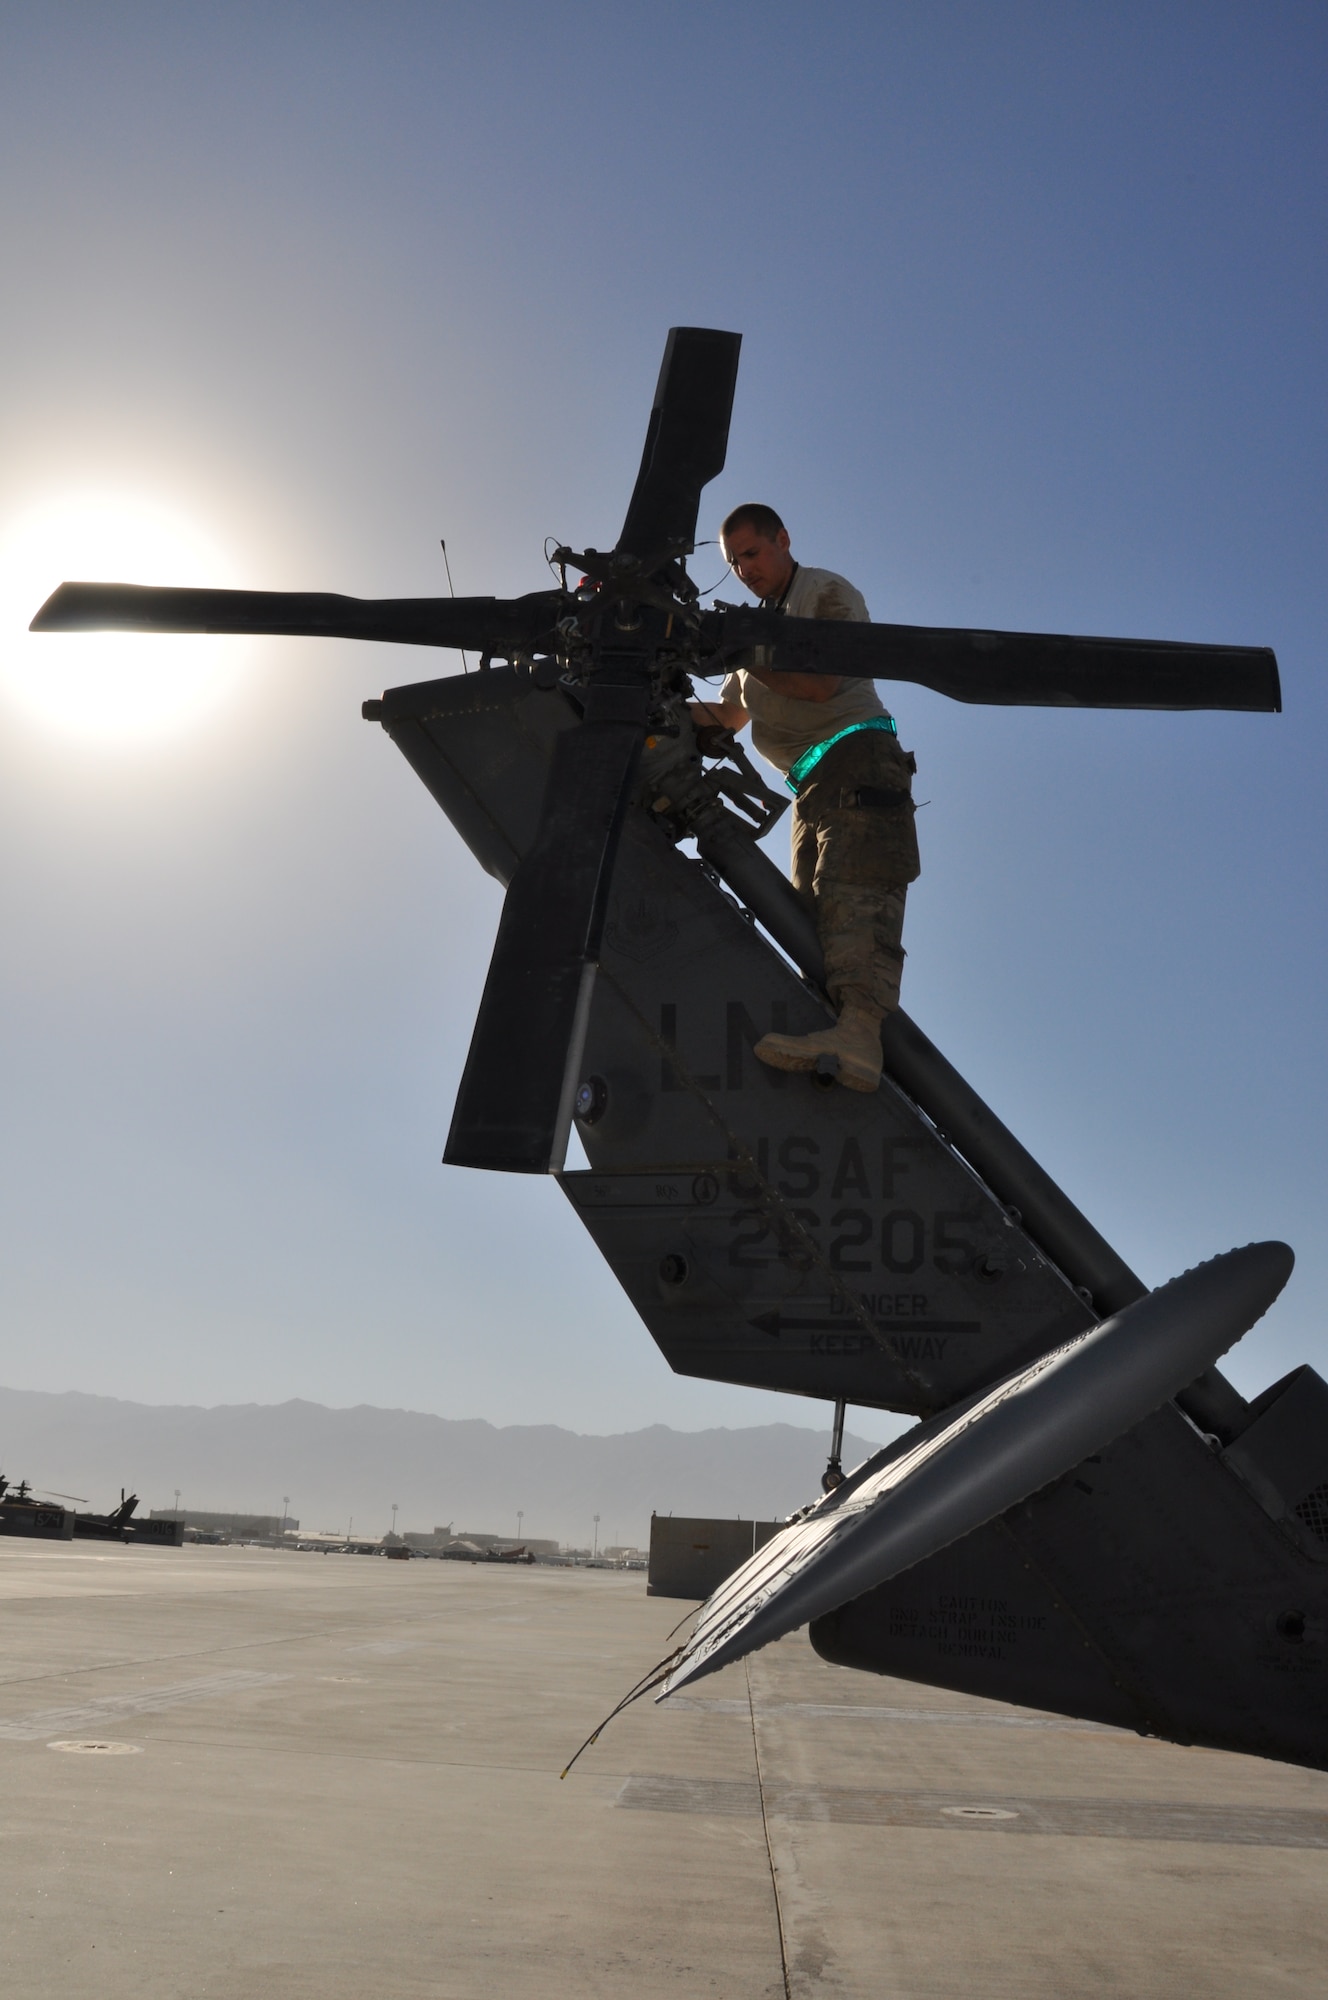 Airman 1st Class Andrew Willard, 455th Expeditionary Maintenance Squadron electronic warfare craftsmen assistant, helps conduct a 50-hour preventative maintenance inspection on aircraft 89-6205, an HH-60G Pave Hawk helicopter assigned to the 56th Expeditionary Helicopter Maintenance Unit at Bagram Airfield, Afghanistan, July 24, 2013. The helo achieved the coveted black-letter initial exceptional release July 23, 2013, for the first time in the unit since 2005. After the ER was signed, the HH-60 launched as part of a mission attributed to saving two lives later the same day. Aircraft 89-6205 happens to be the same aircraft that attained the status for the unit eight years ago. (U.S. Air Force photo/Tech. Sgt. Rob Hazelett)